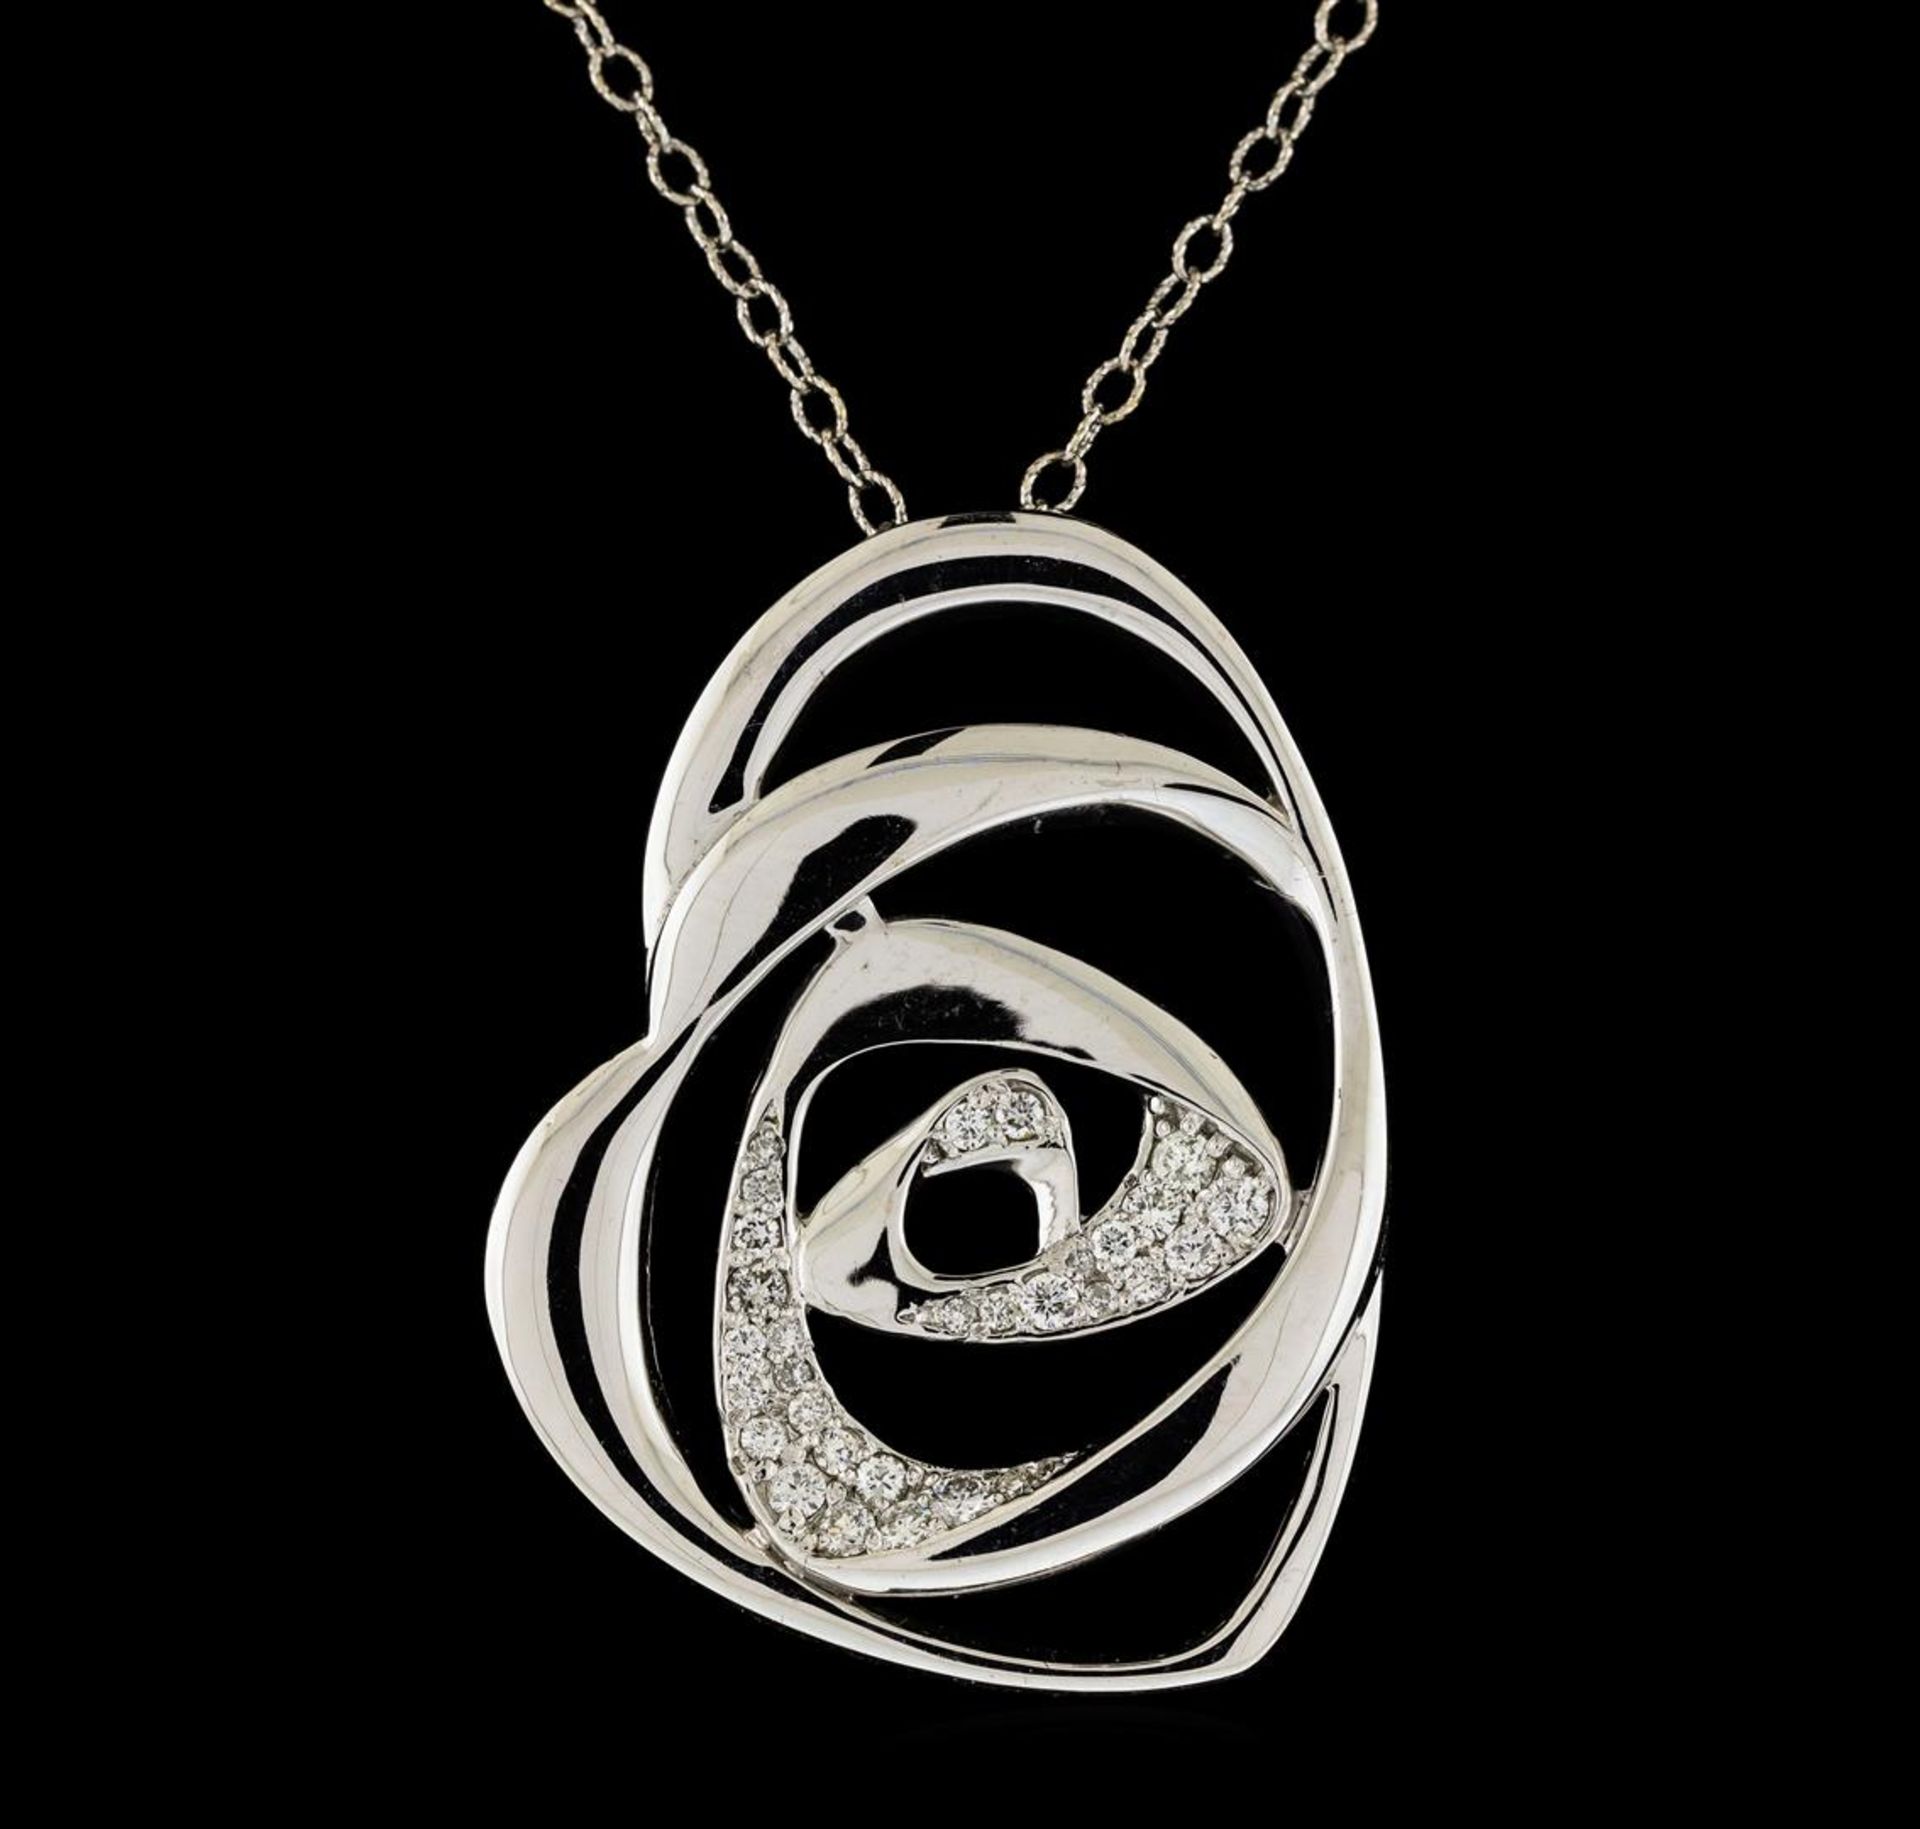 0.50 ctw Diamond Pendant With Chain - 14KT White Gold - Image 2 of 3